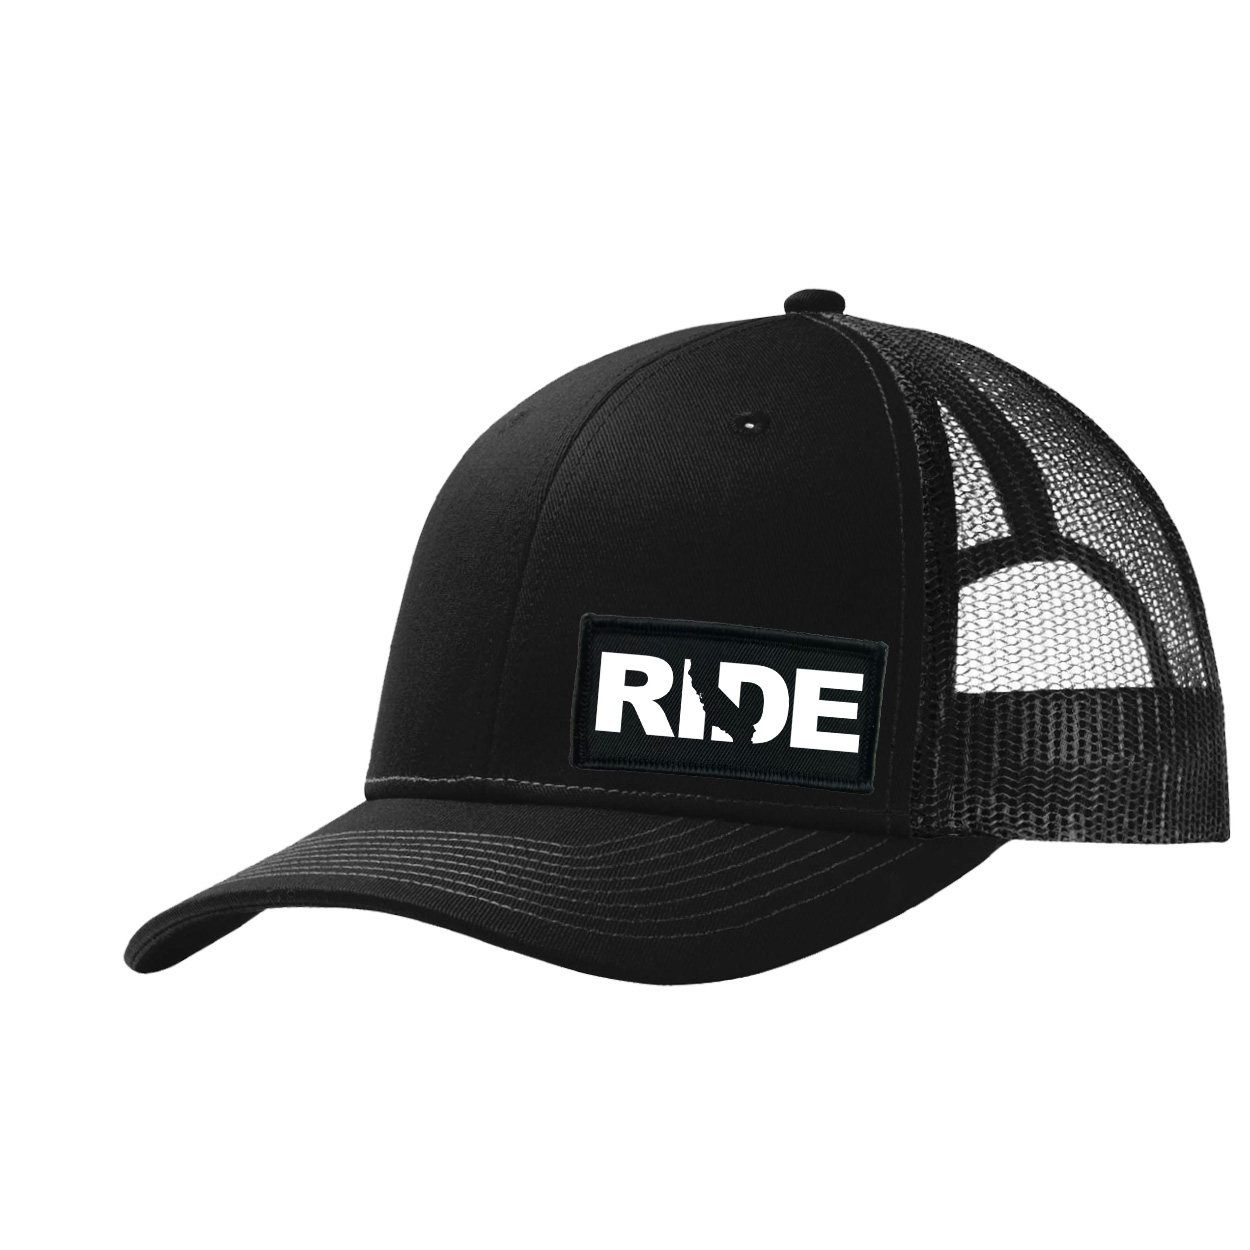 Ride California Night Out Woven Patch Snapback Trucker Hat Black (White Logo)